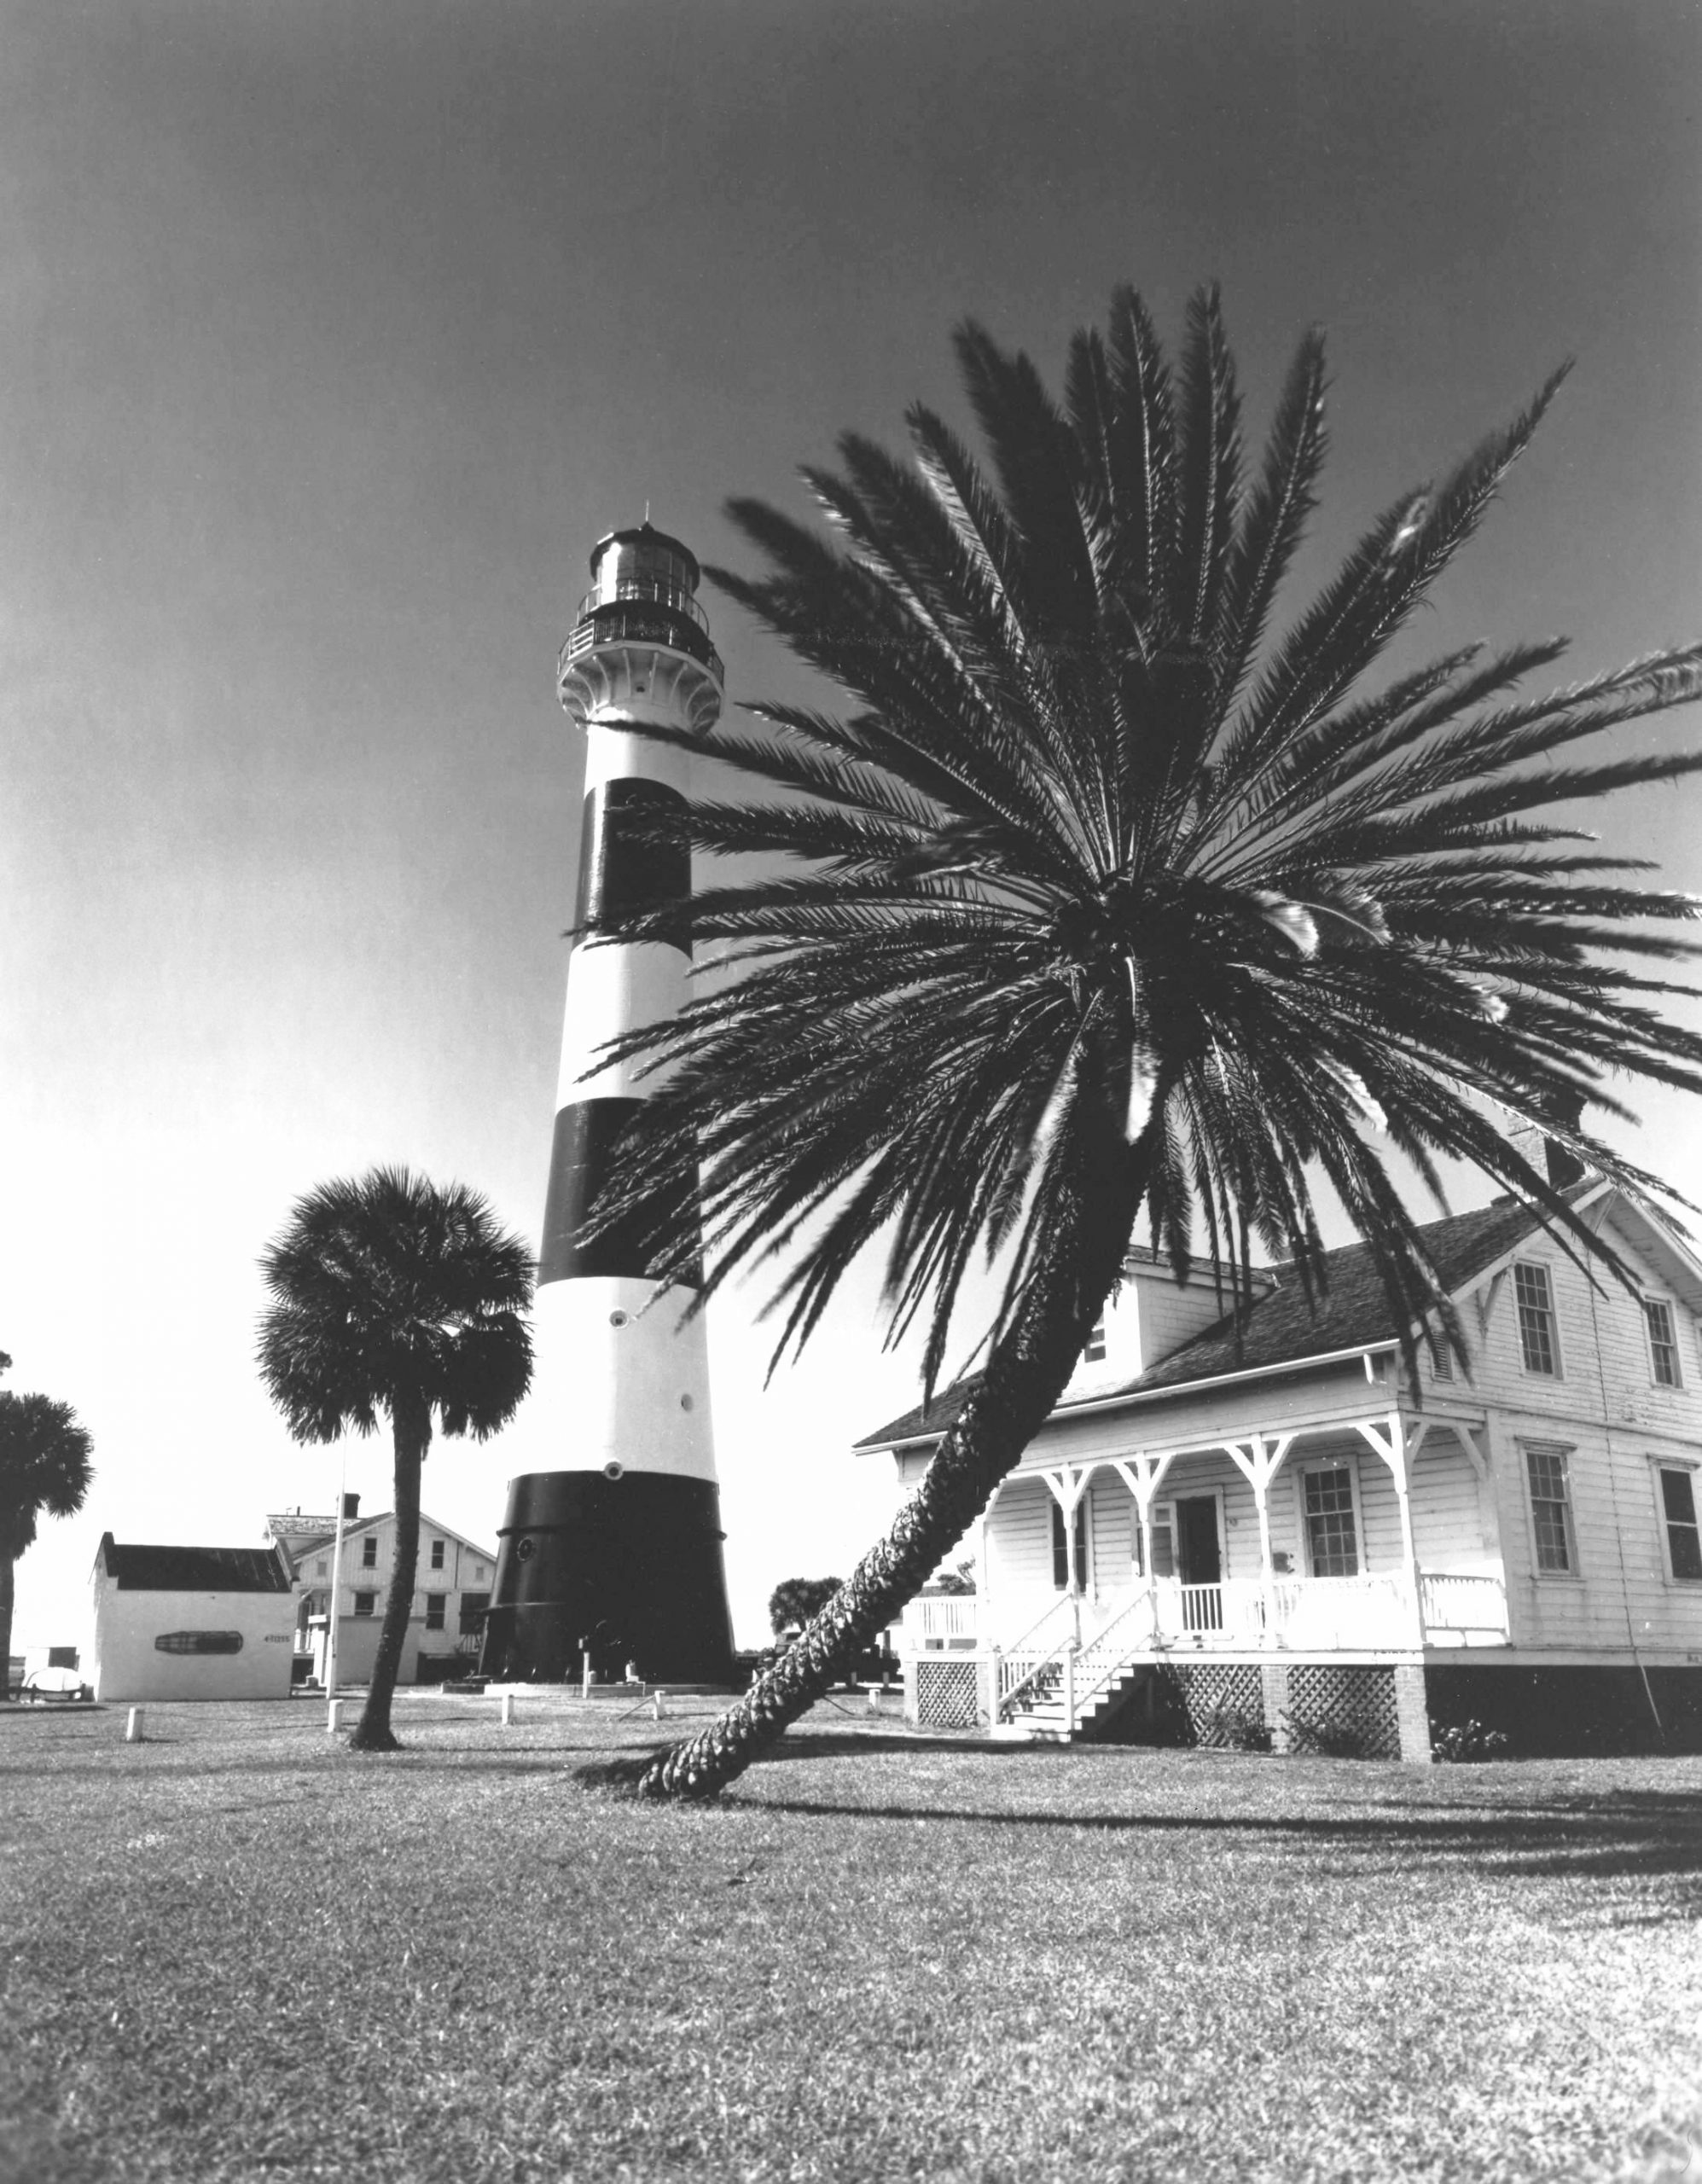 History of the Cape Canaveral Lighthouse